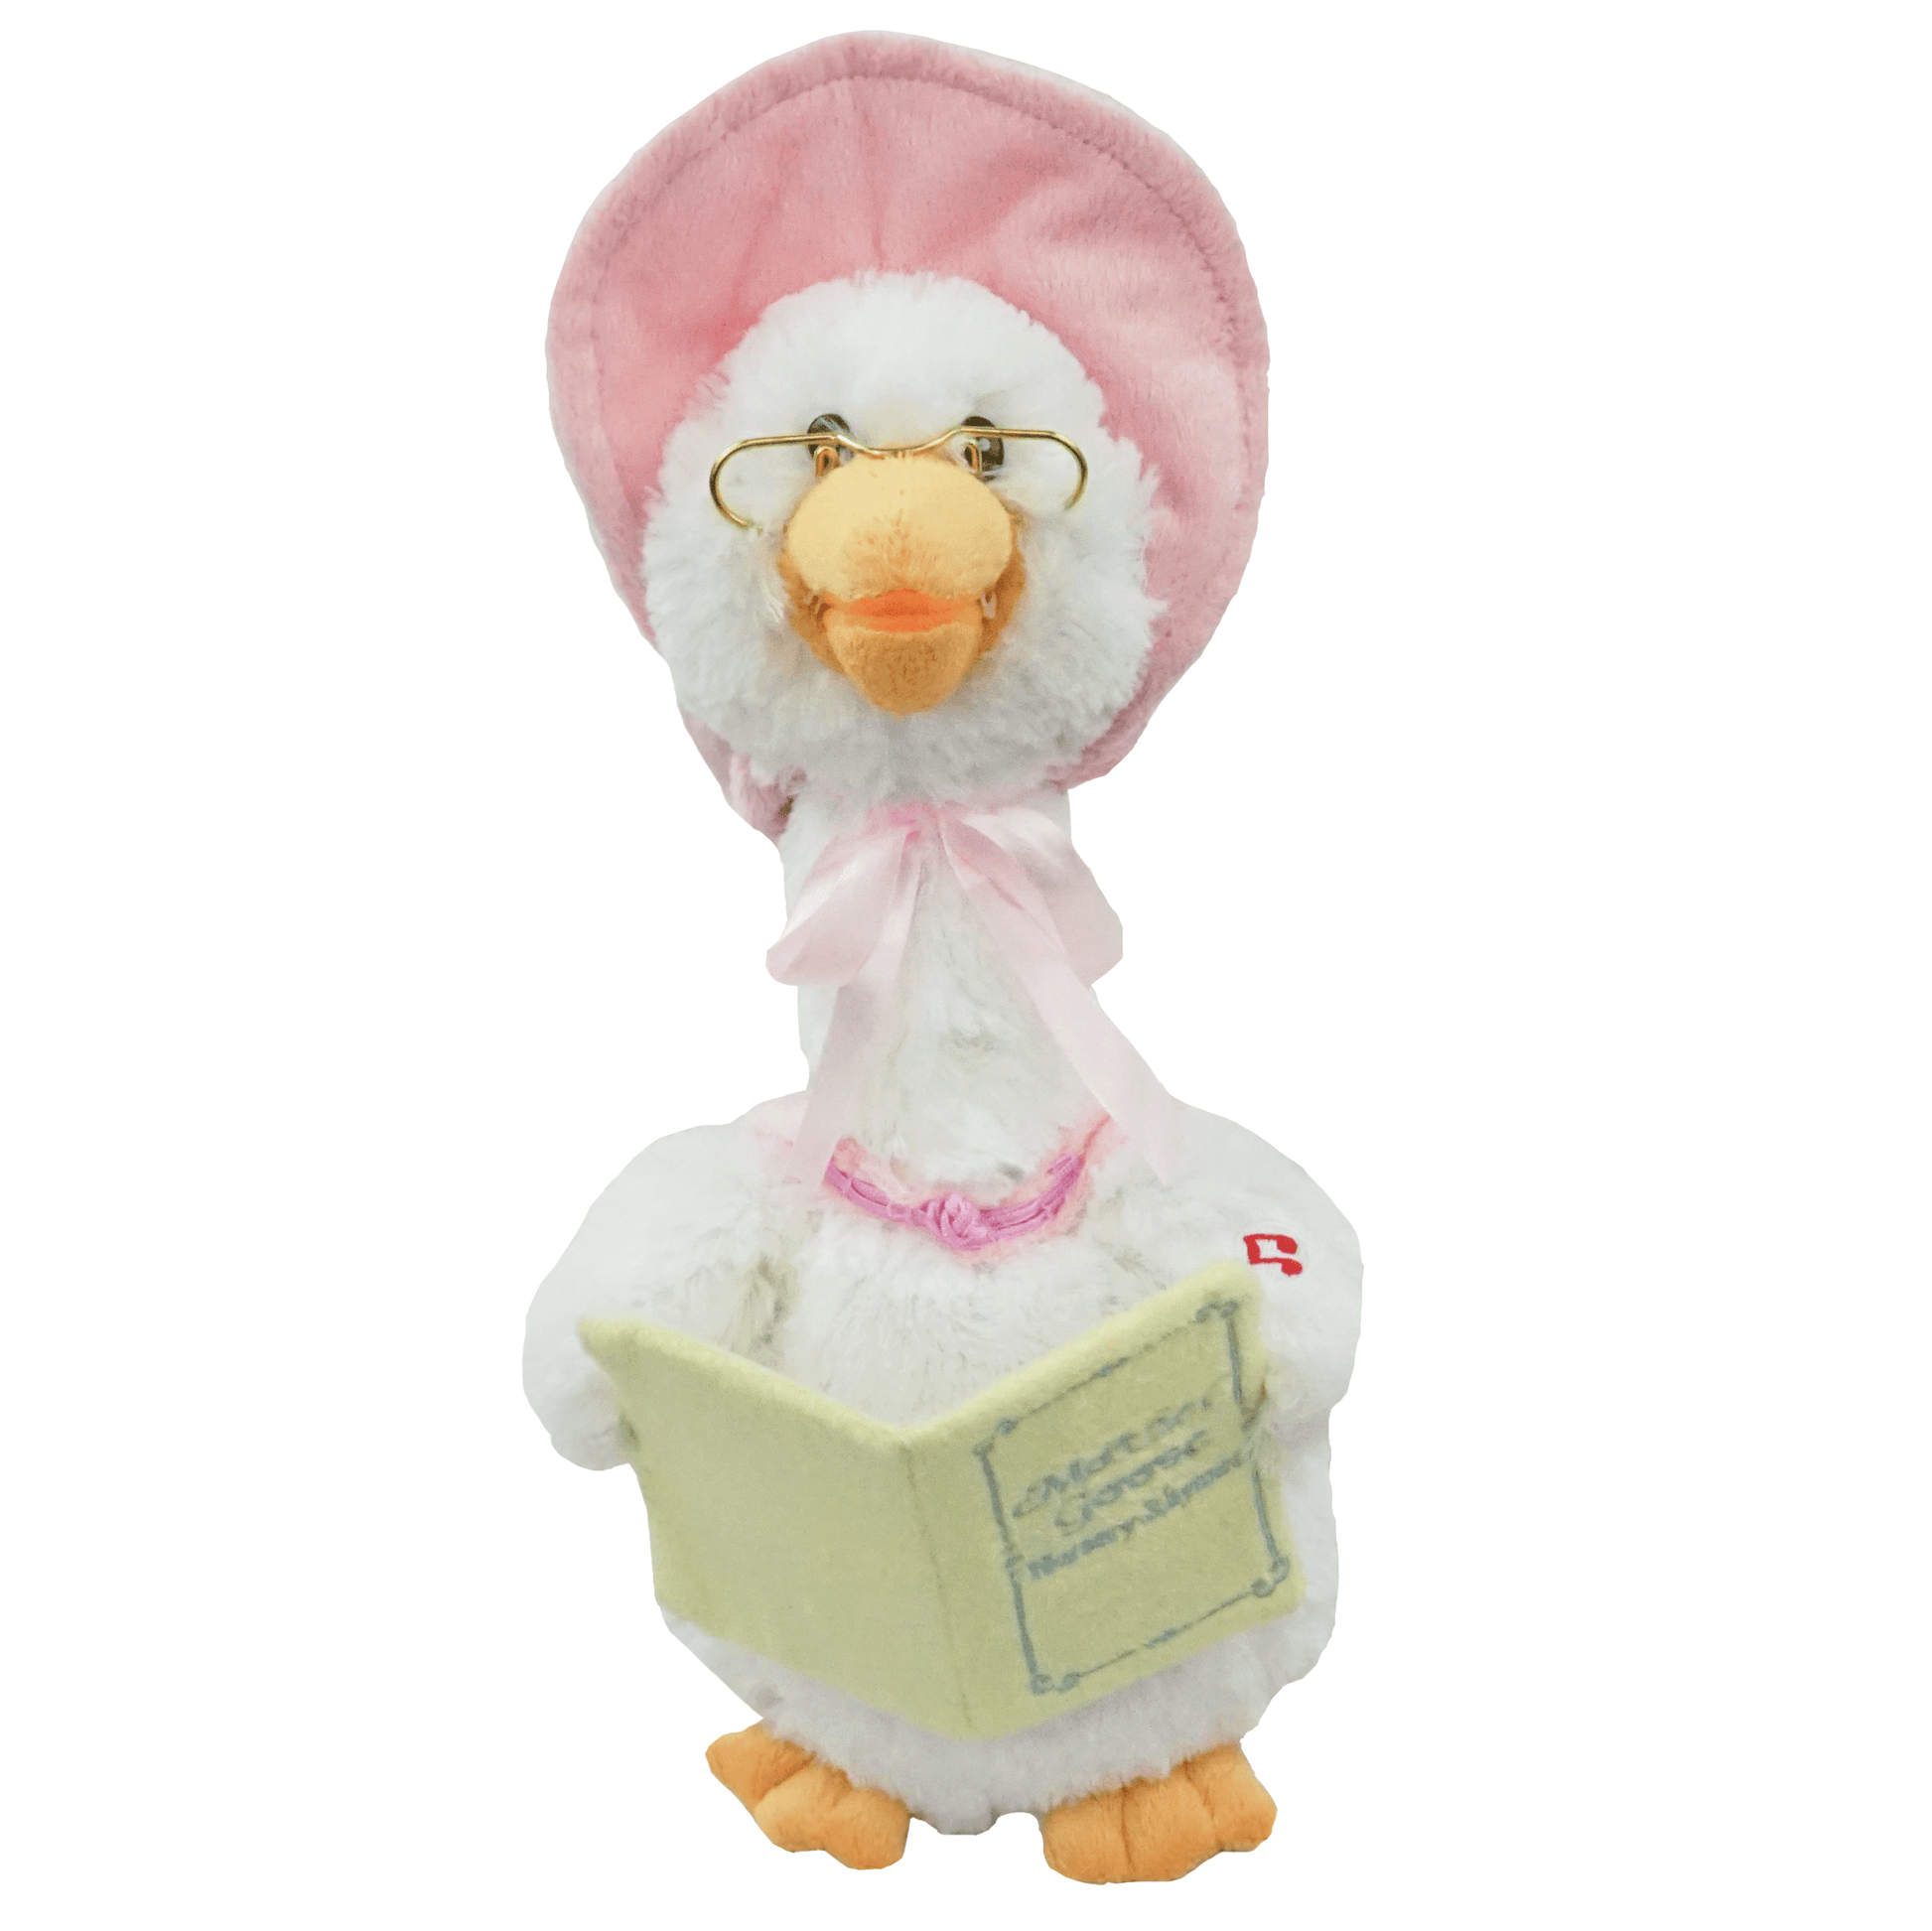 Mother Goose Singing Toy and Book Set